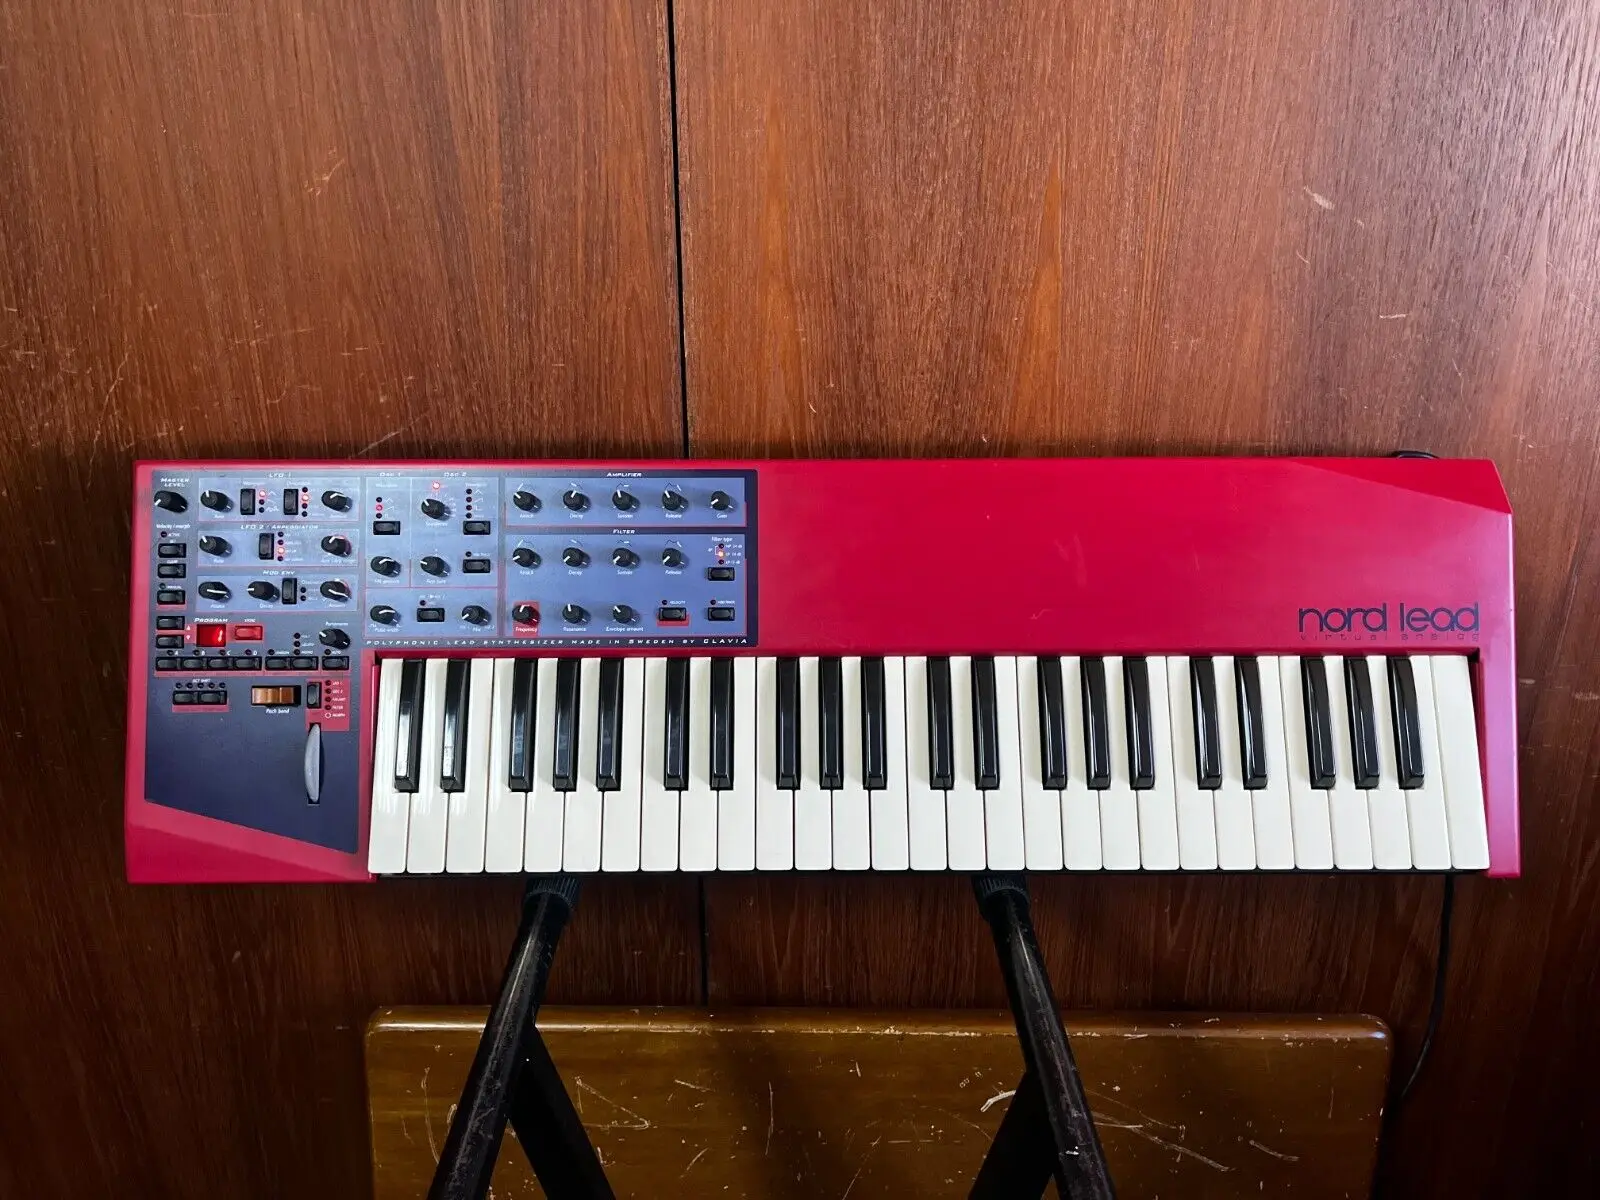 

QUALITY VALUES Clavia nord lead Virtual Analog Synthesizer